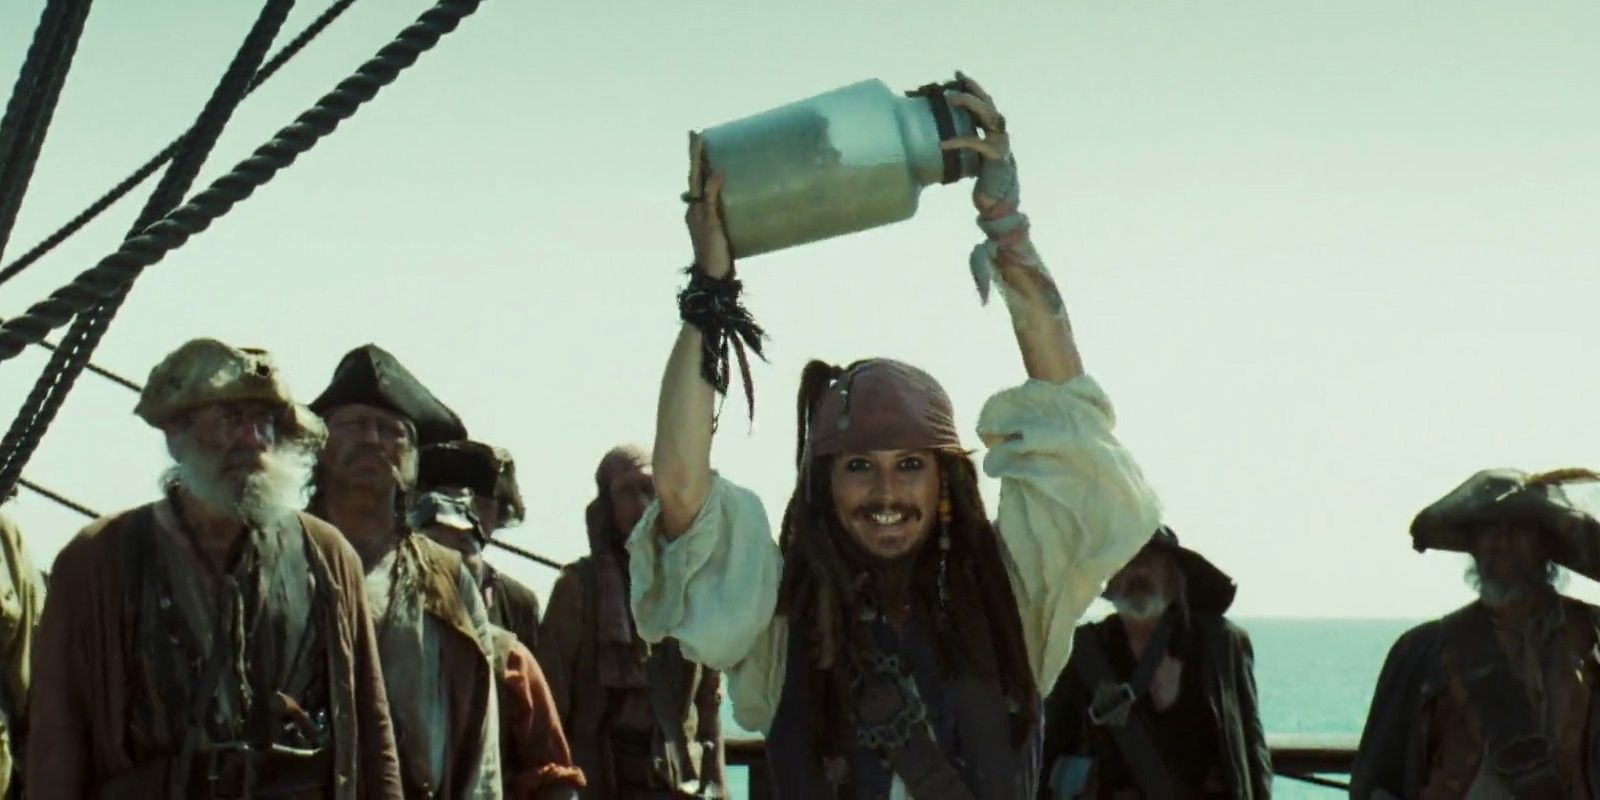 Captain Jack Sparrow holds up his jar of dirt in Pirates of the Caribbean